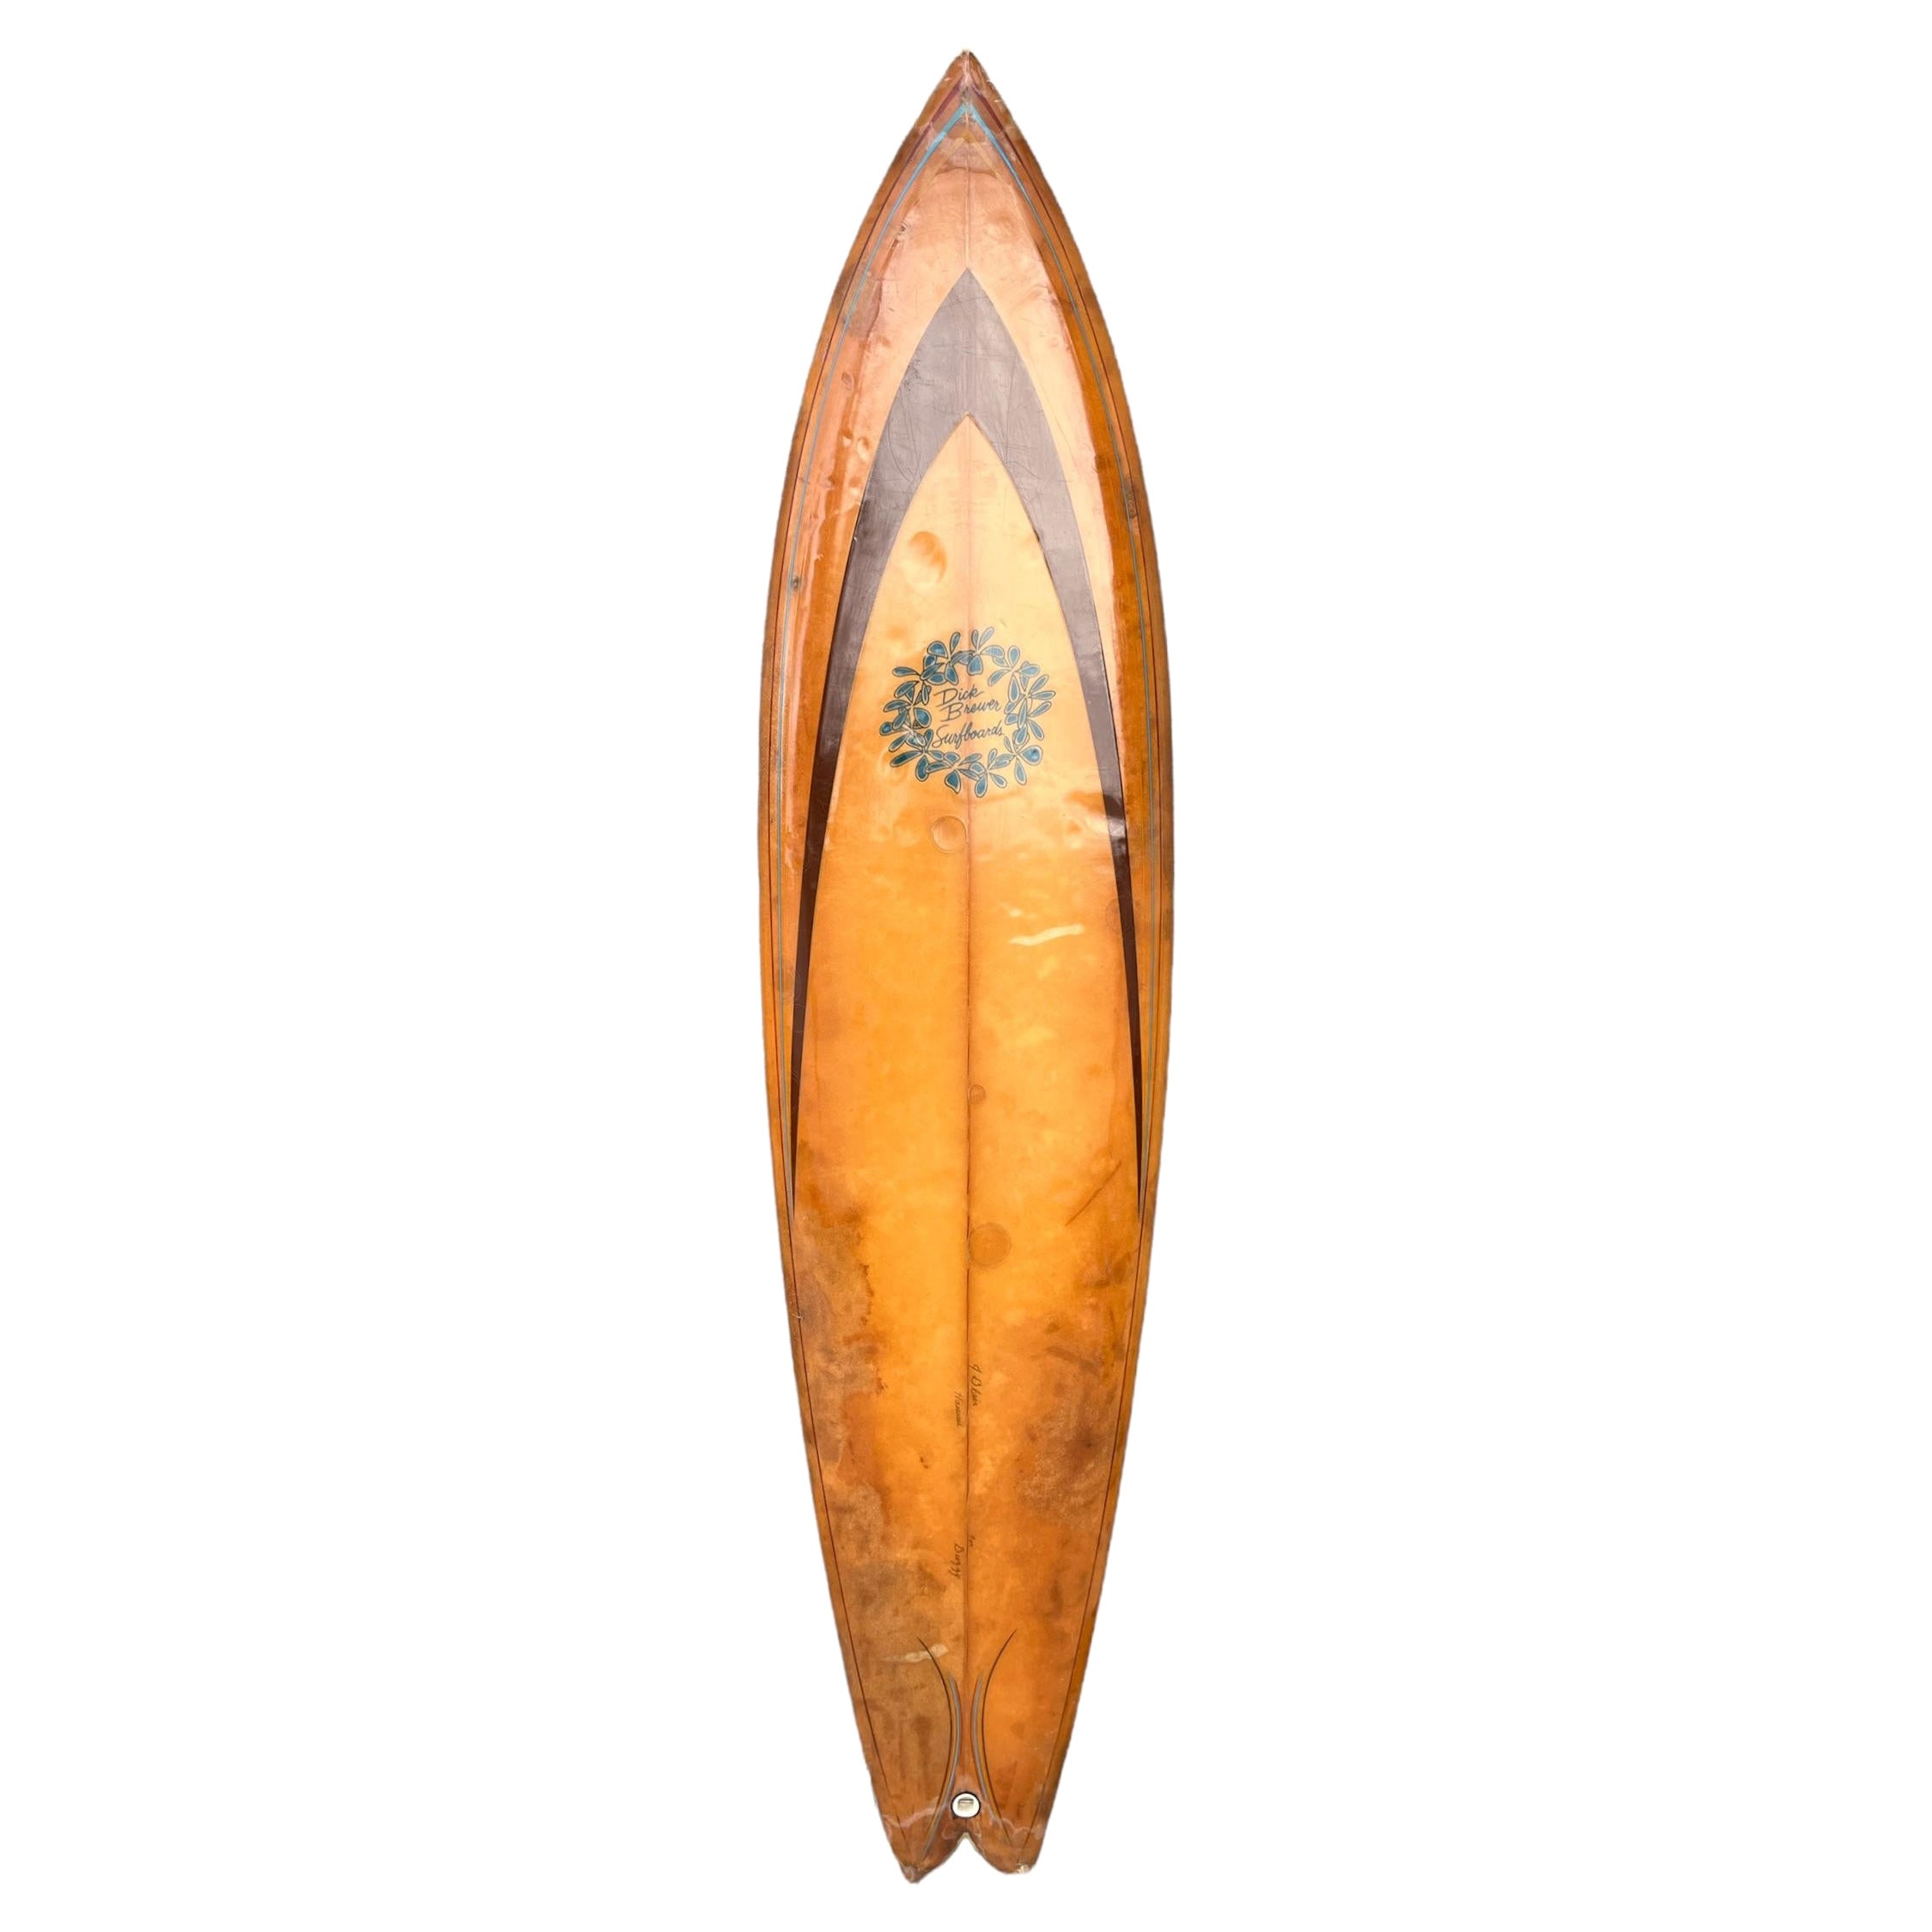 1970s Dick Brewer Surfboard Made for Burton “Buzzy” Kerbox